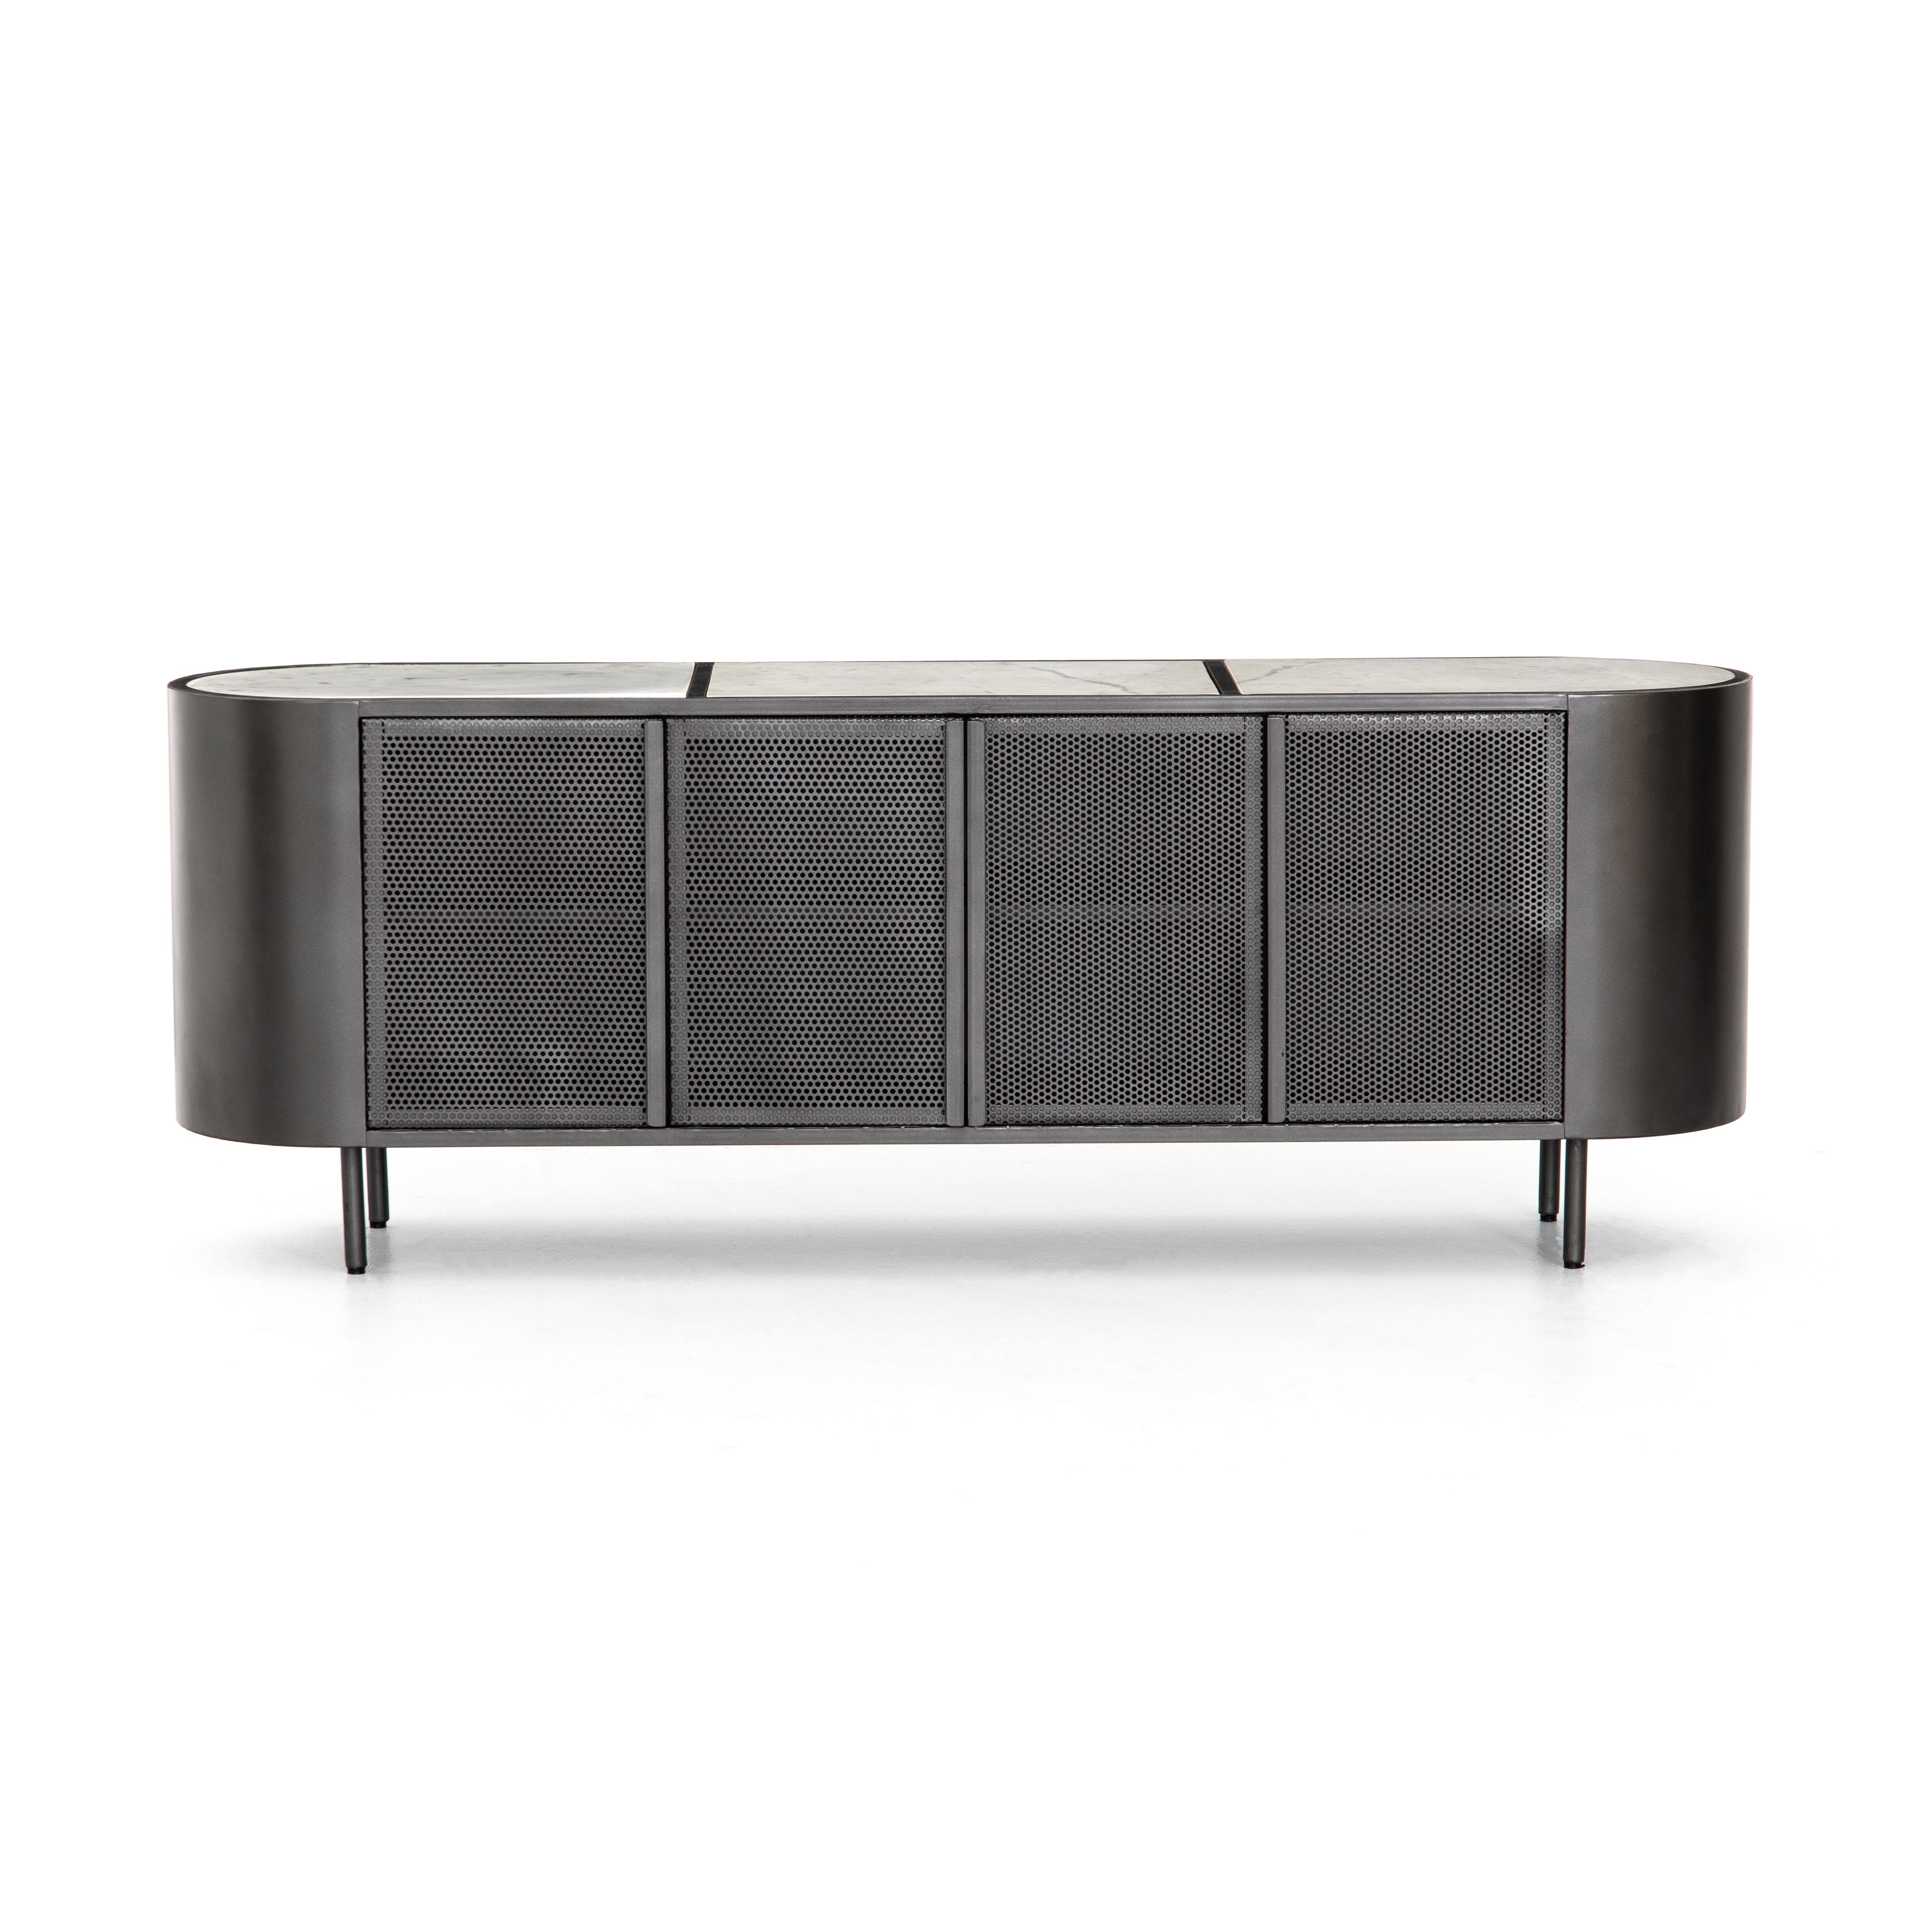 The Libby Media Console is sleek and practical, with it's black finish and polished white triptych-style marble top.  Size: 72"w x 17"d x 26"h Materials: Iron, Iron, Marble